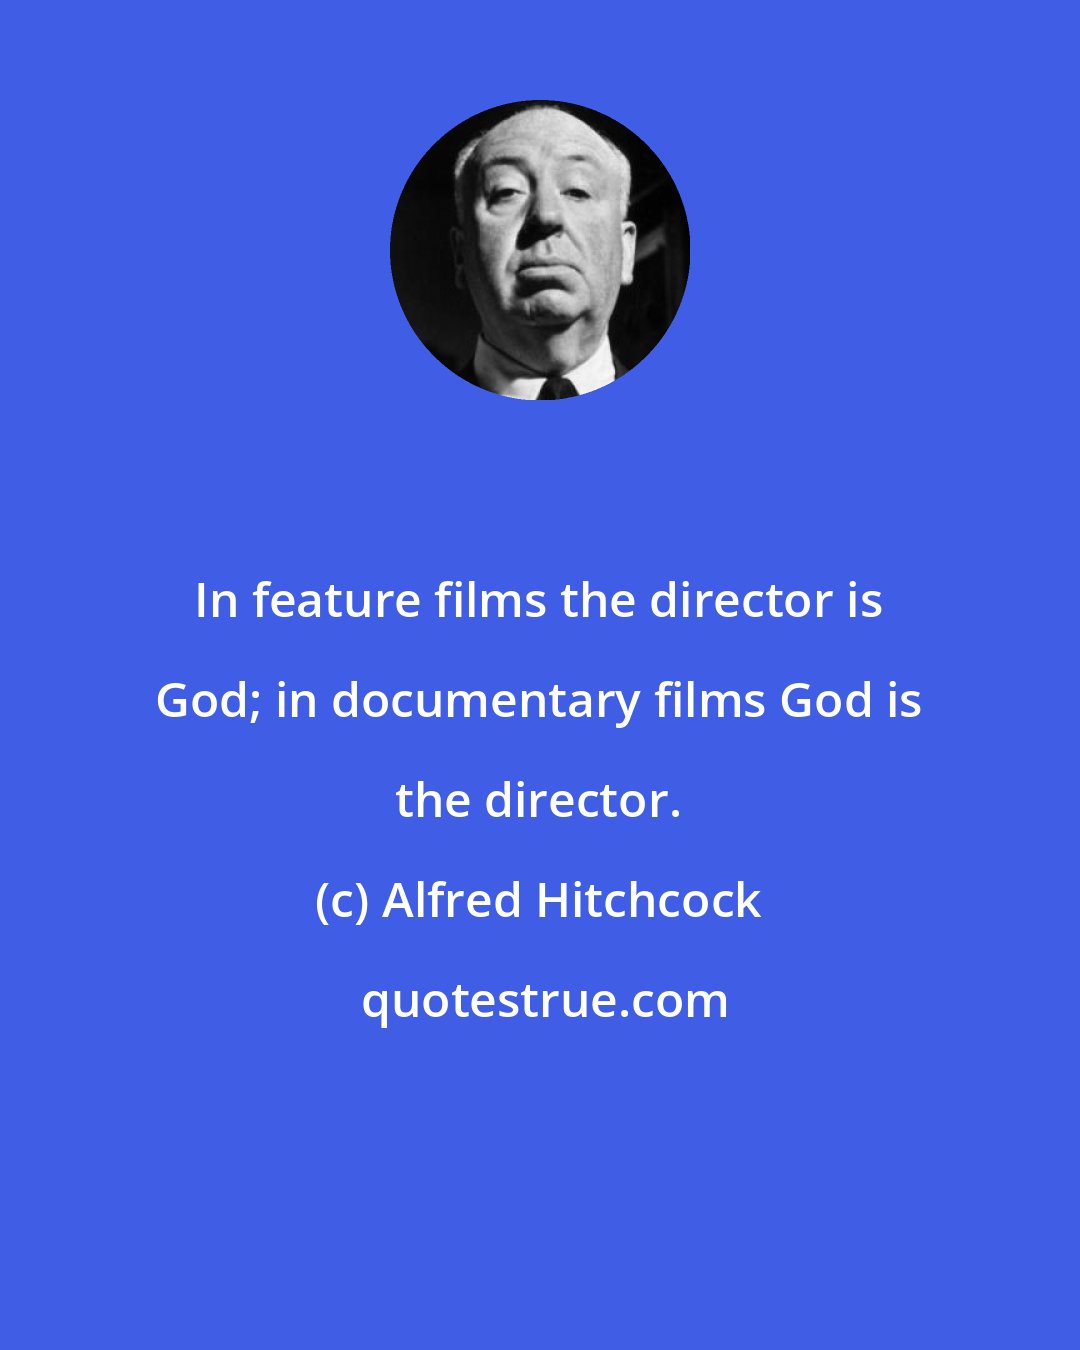 Alfred Hitchcock: In feature films the director is God; in documentary films God is the director.